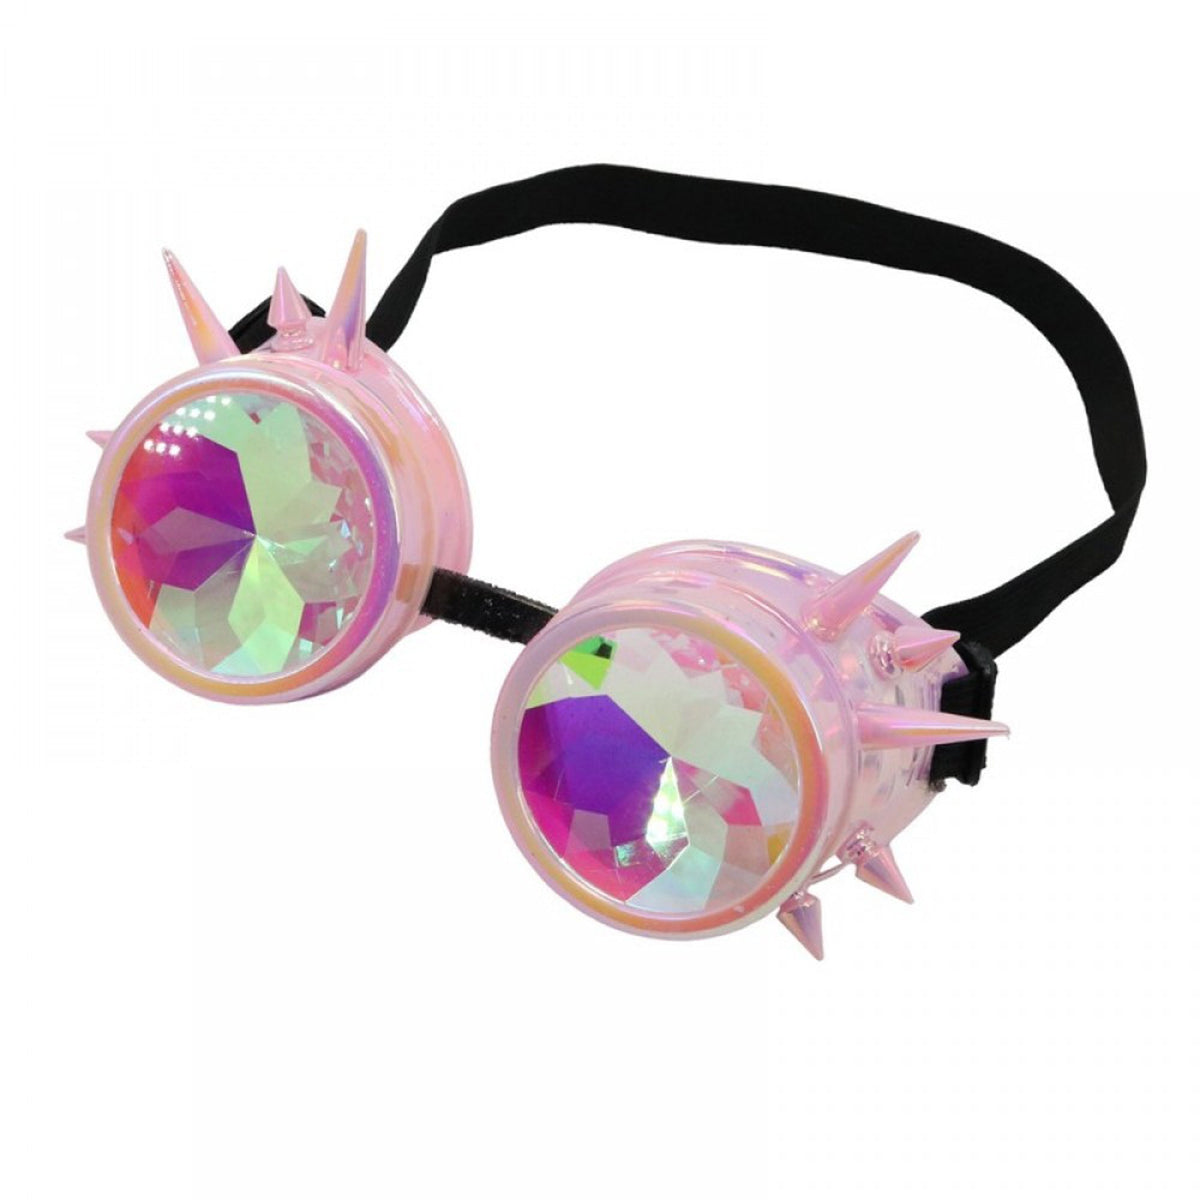 KBW GLOBAL CORP Costume Accessories Pink Steampunk Rainbow Goggles for Adults